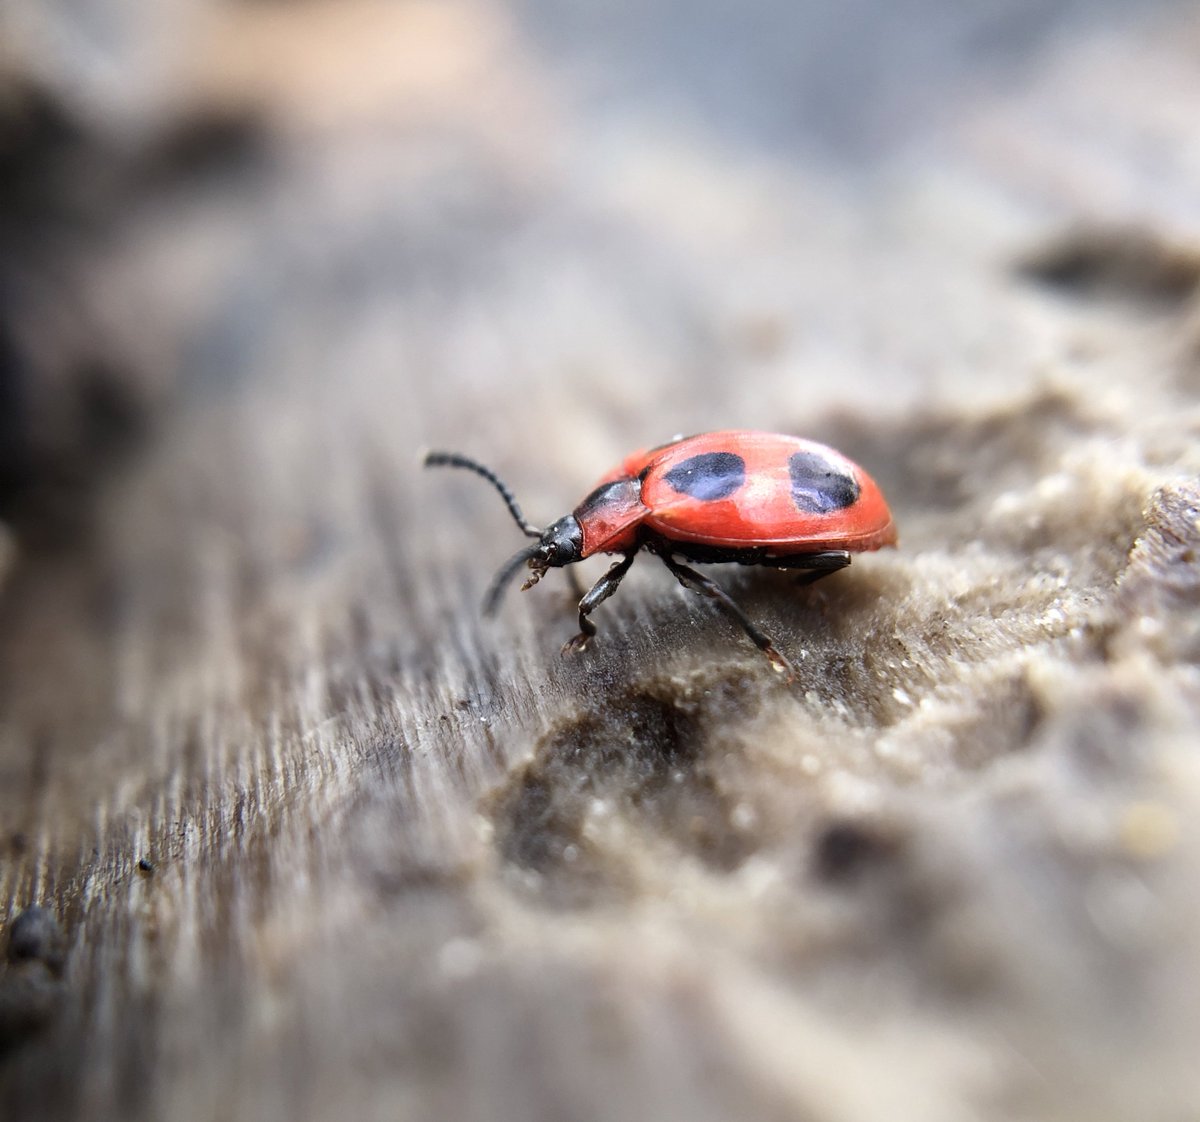 Delighted to find 4 of these fabulous little fakers, Endomychus coccineus, AKA the False Ladybird. 🐞

Nice try beetle, but you don’t fool me. 

#AmazingBeetles #Winterwatch